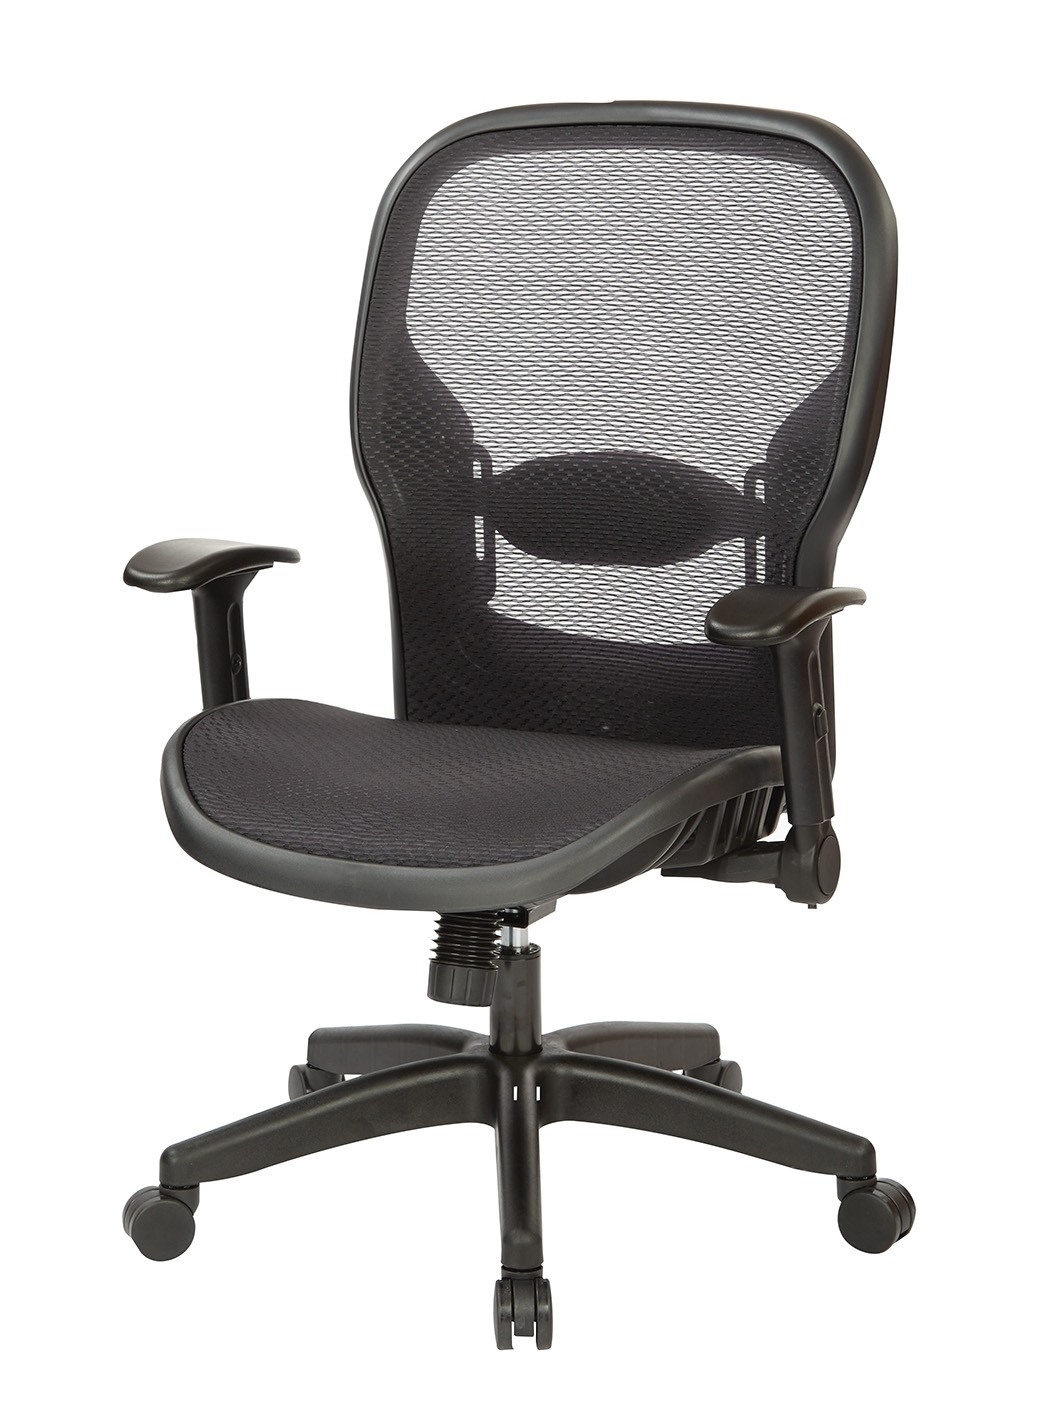 Space Seating 23 Series Manager's Chair #23-77N1F2